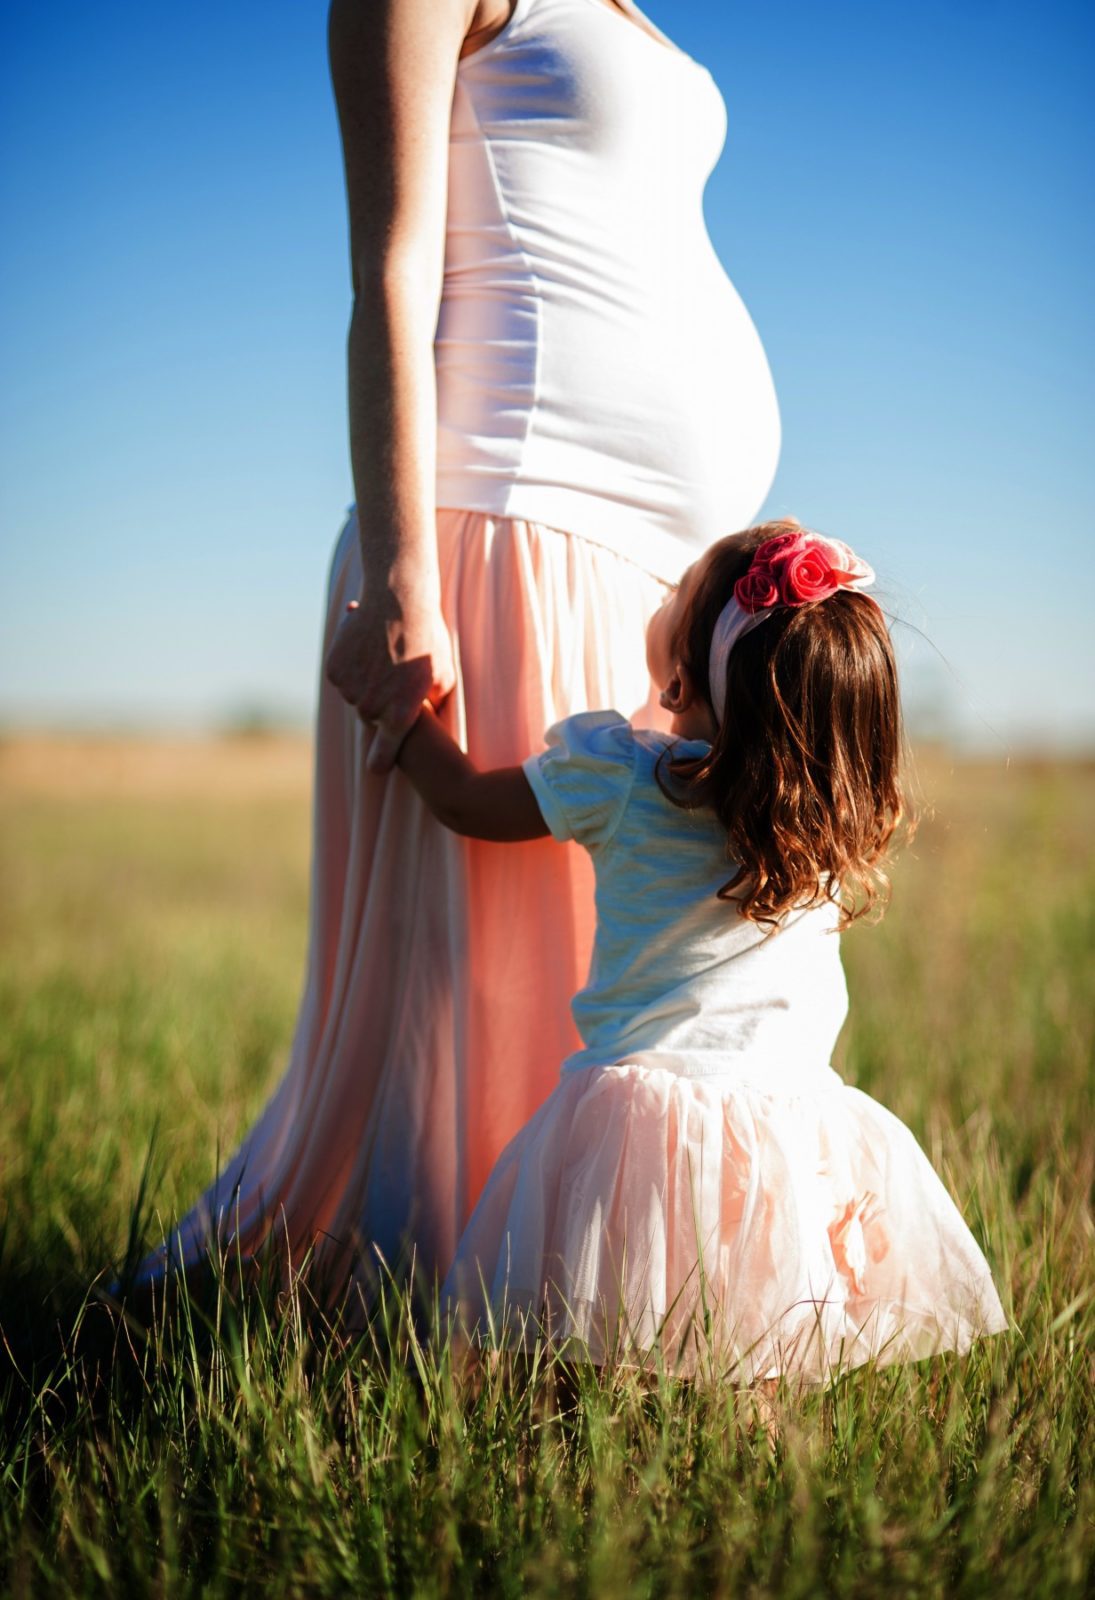 Chinese Medicine & Acupuncture for Pregnancy and Beyond